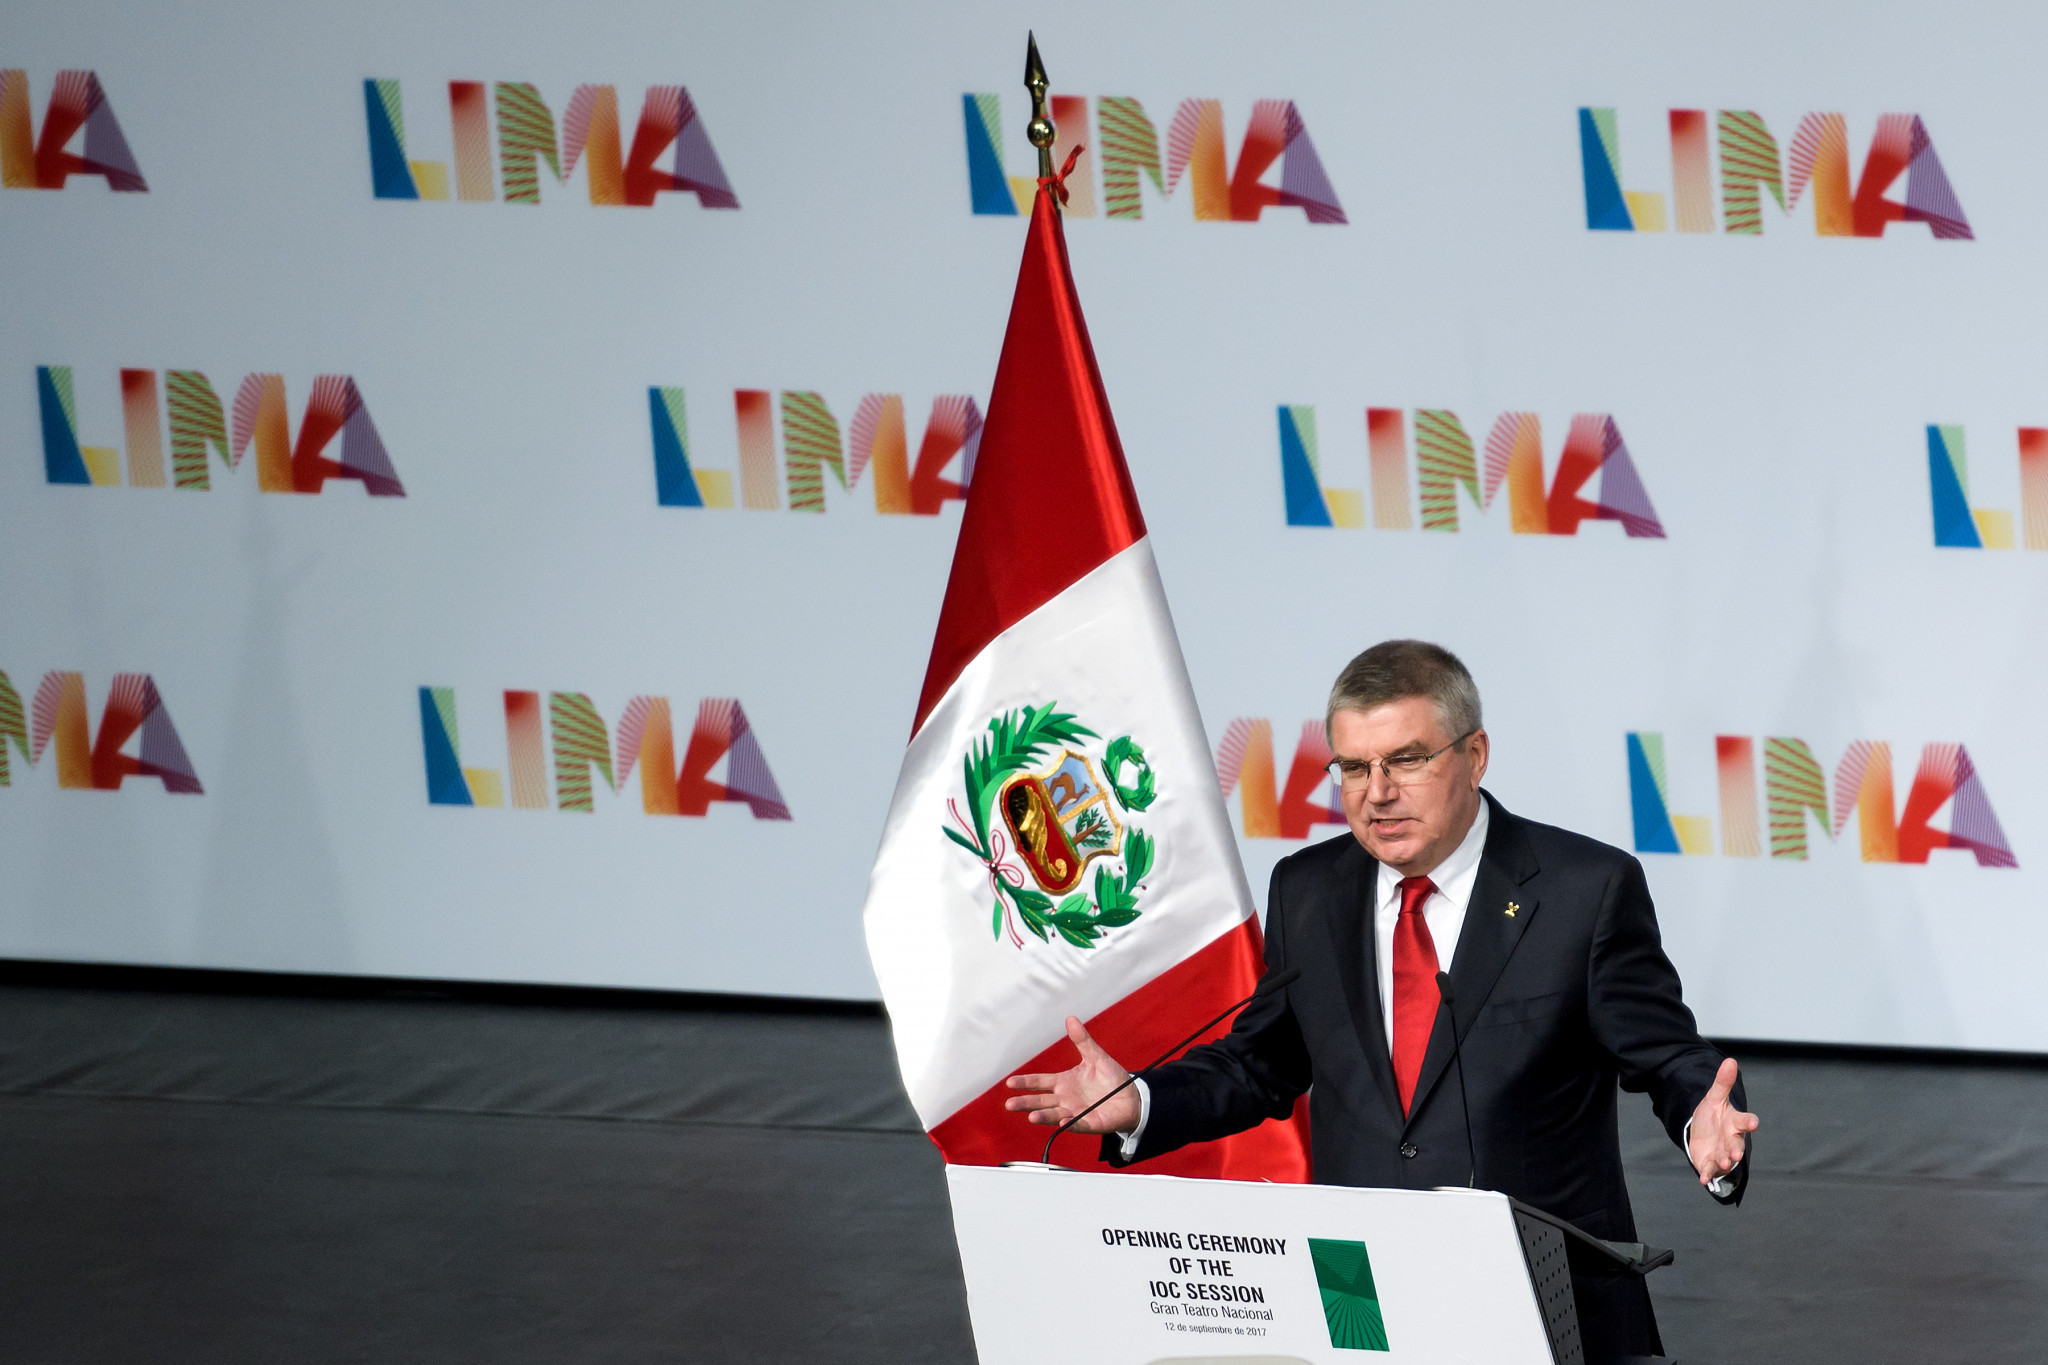 Thomas Bach spoke at length about issues Pyeongchang 2018 and governance ©Getty Images